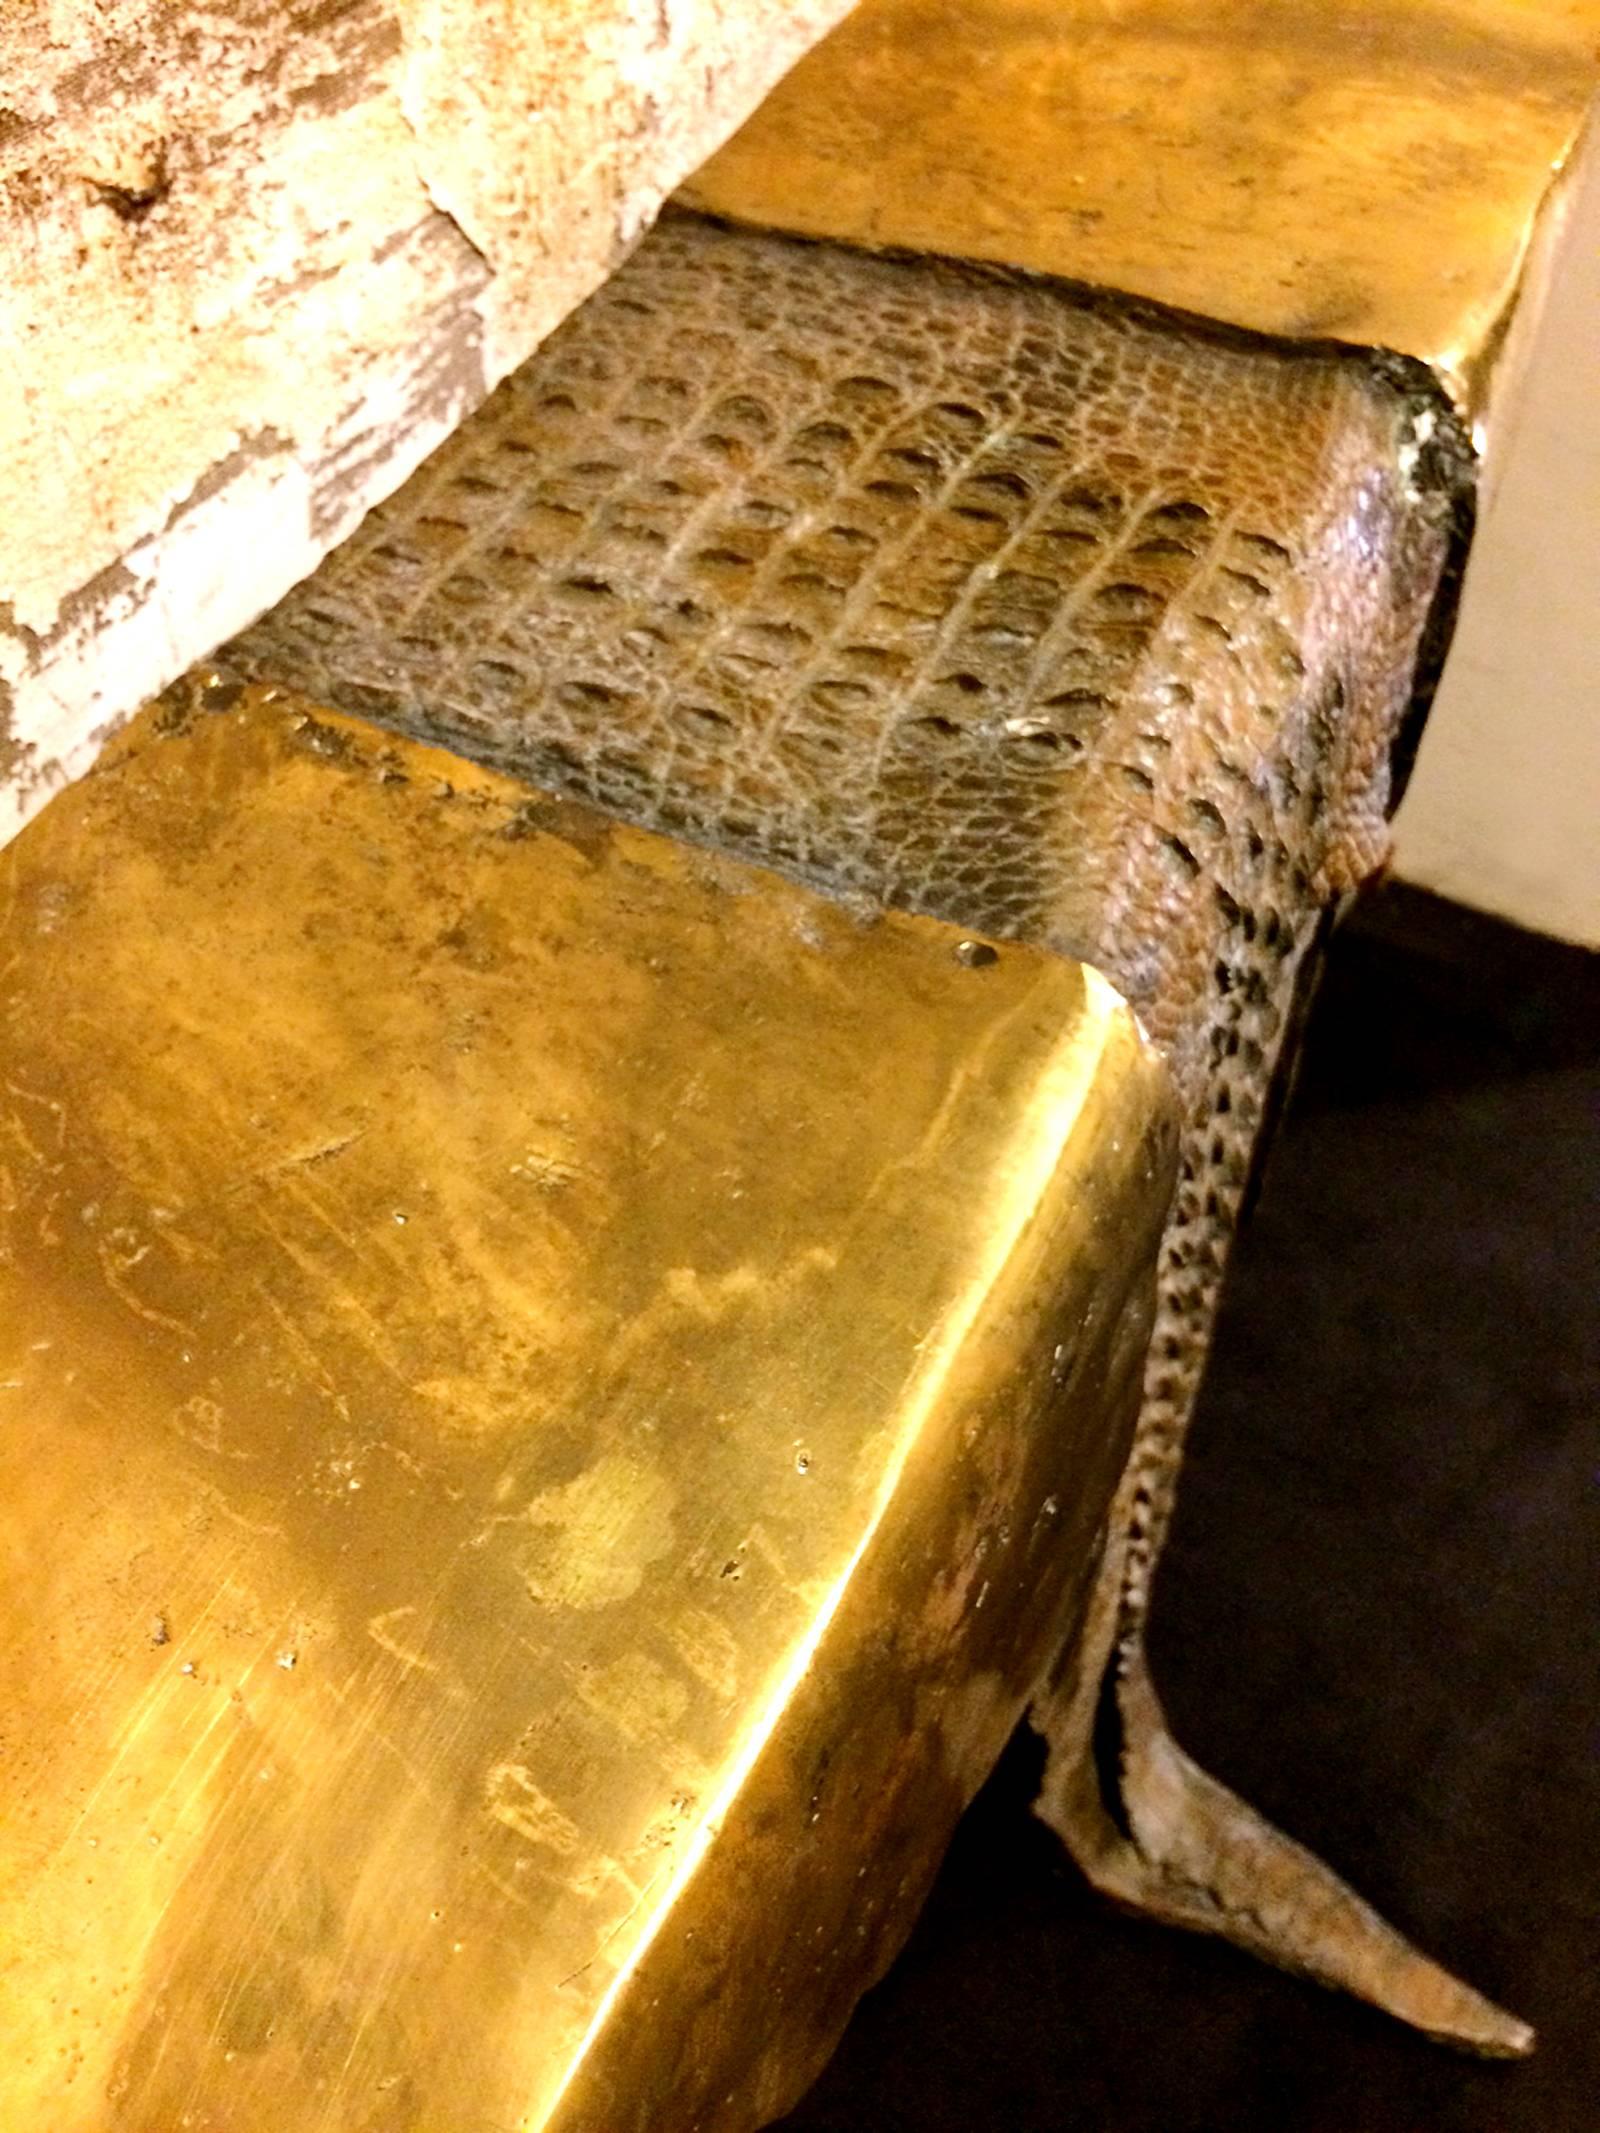 Console croco tail made with cargo tole,
cayman tail al in solid bronze. Handcrafted 
exceptional unique piece.
.